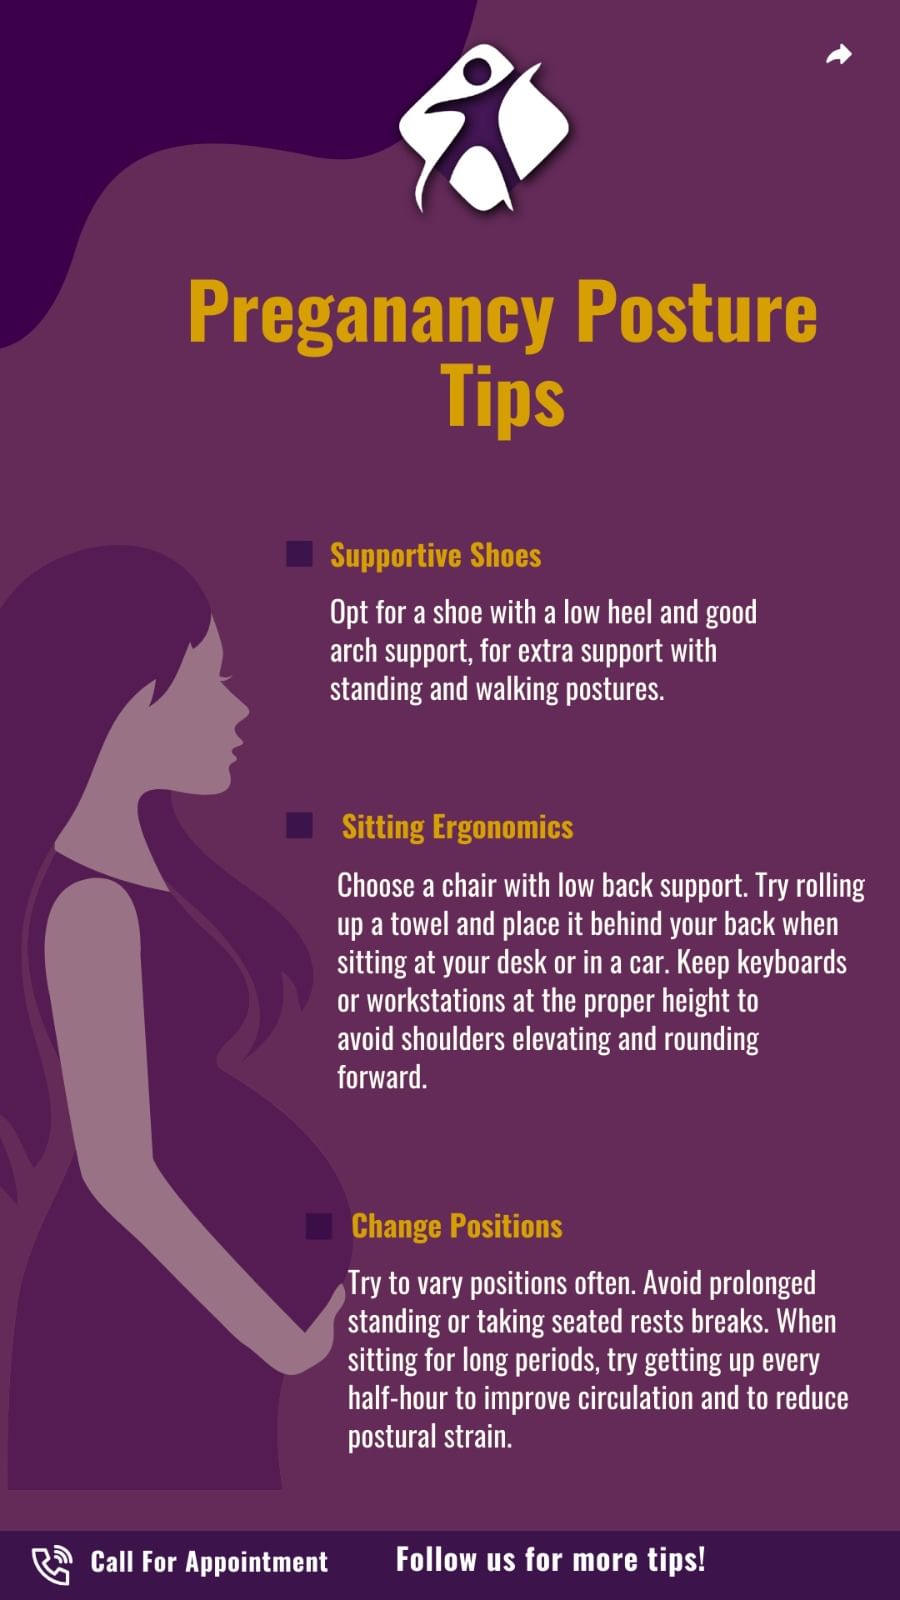 Pregnancy Posture Tips from Acme Physiotherapy and Chiropractic Clinic in Pune